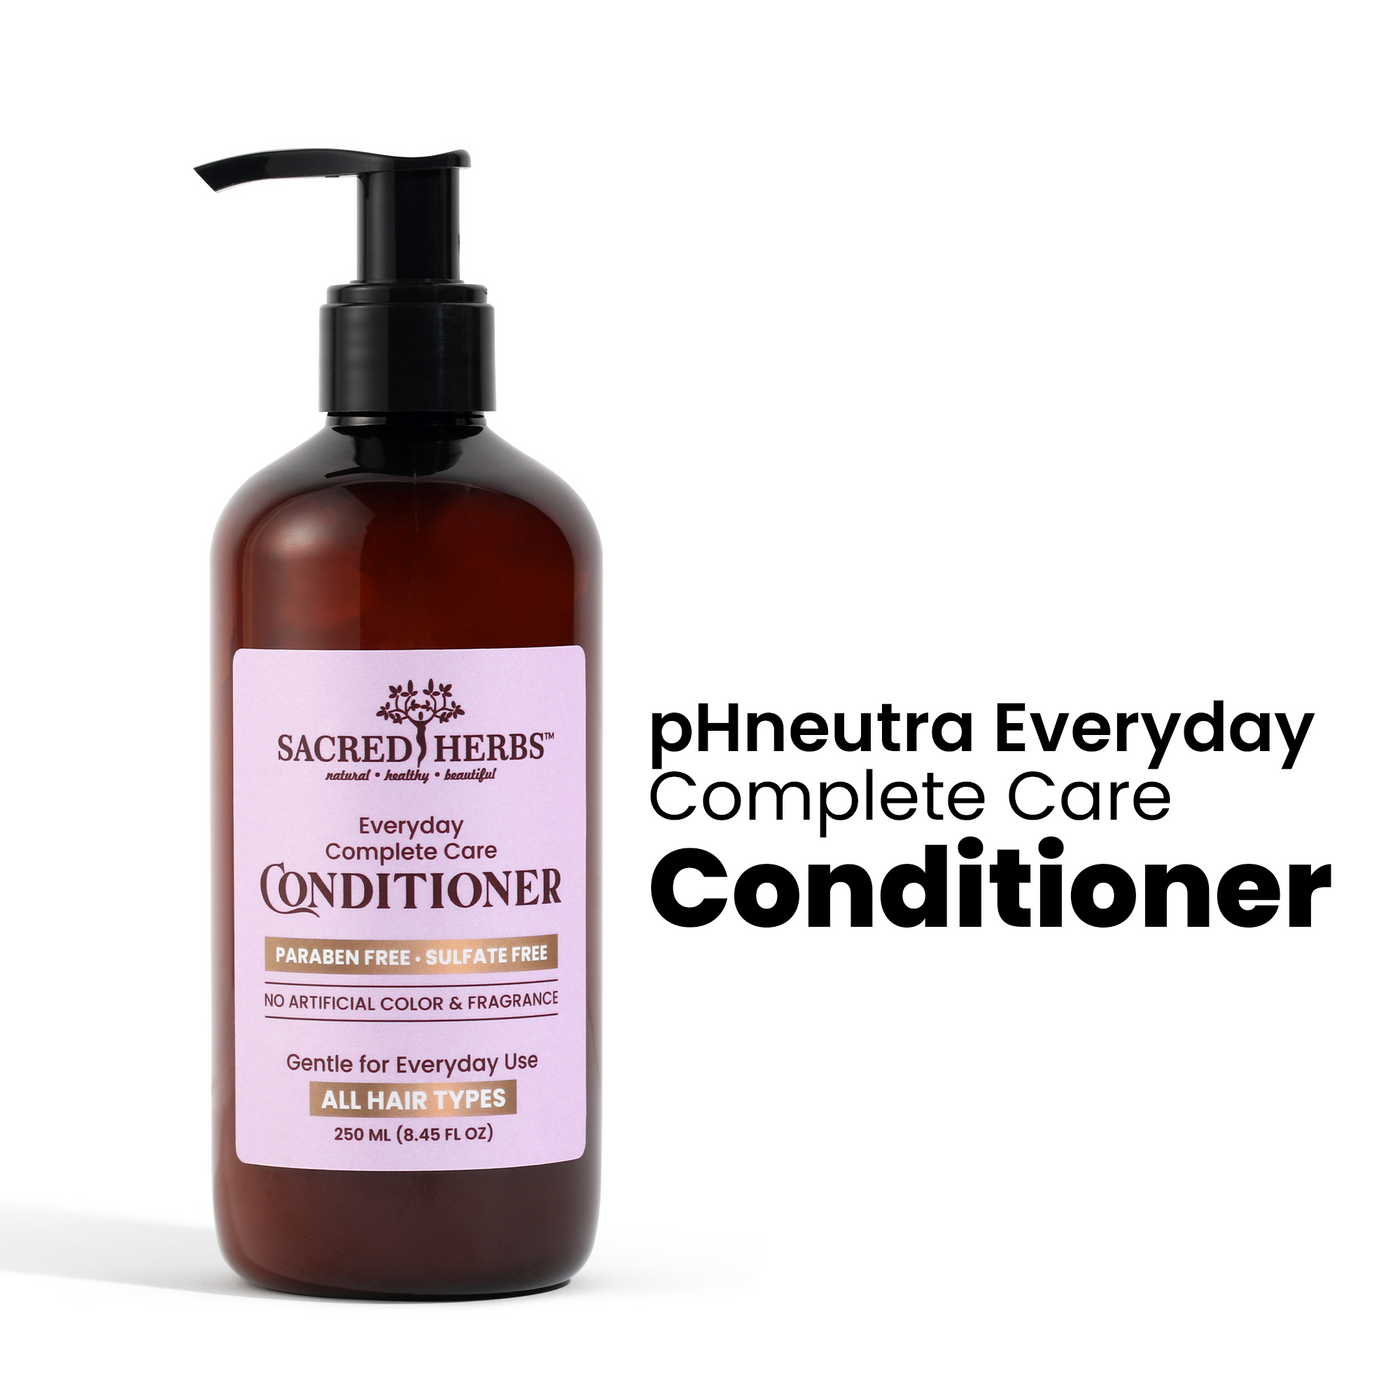 Sacred Herbs® pHneutra® Daily Use Conditioner